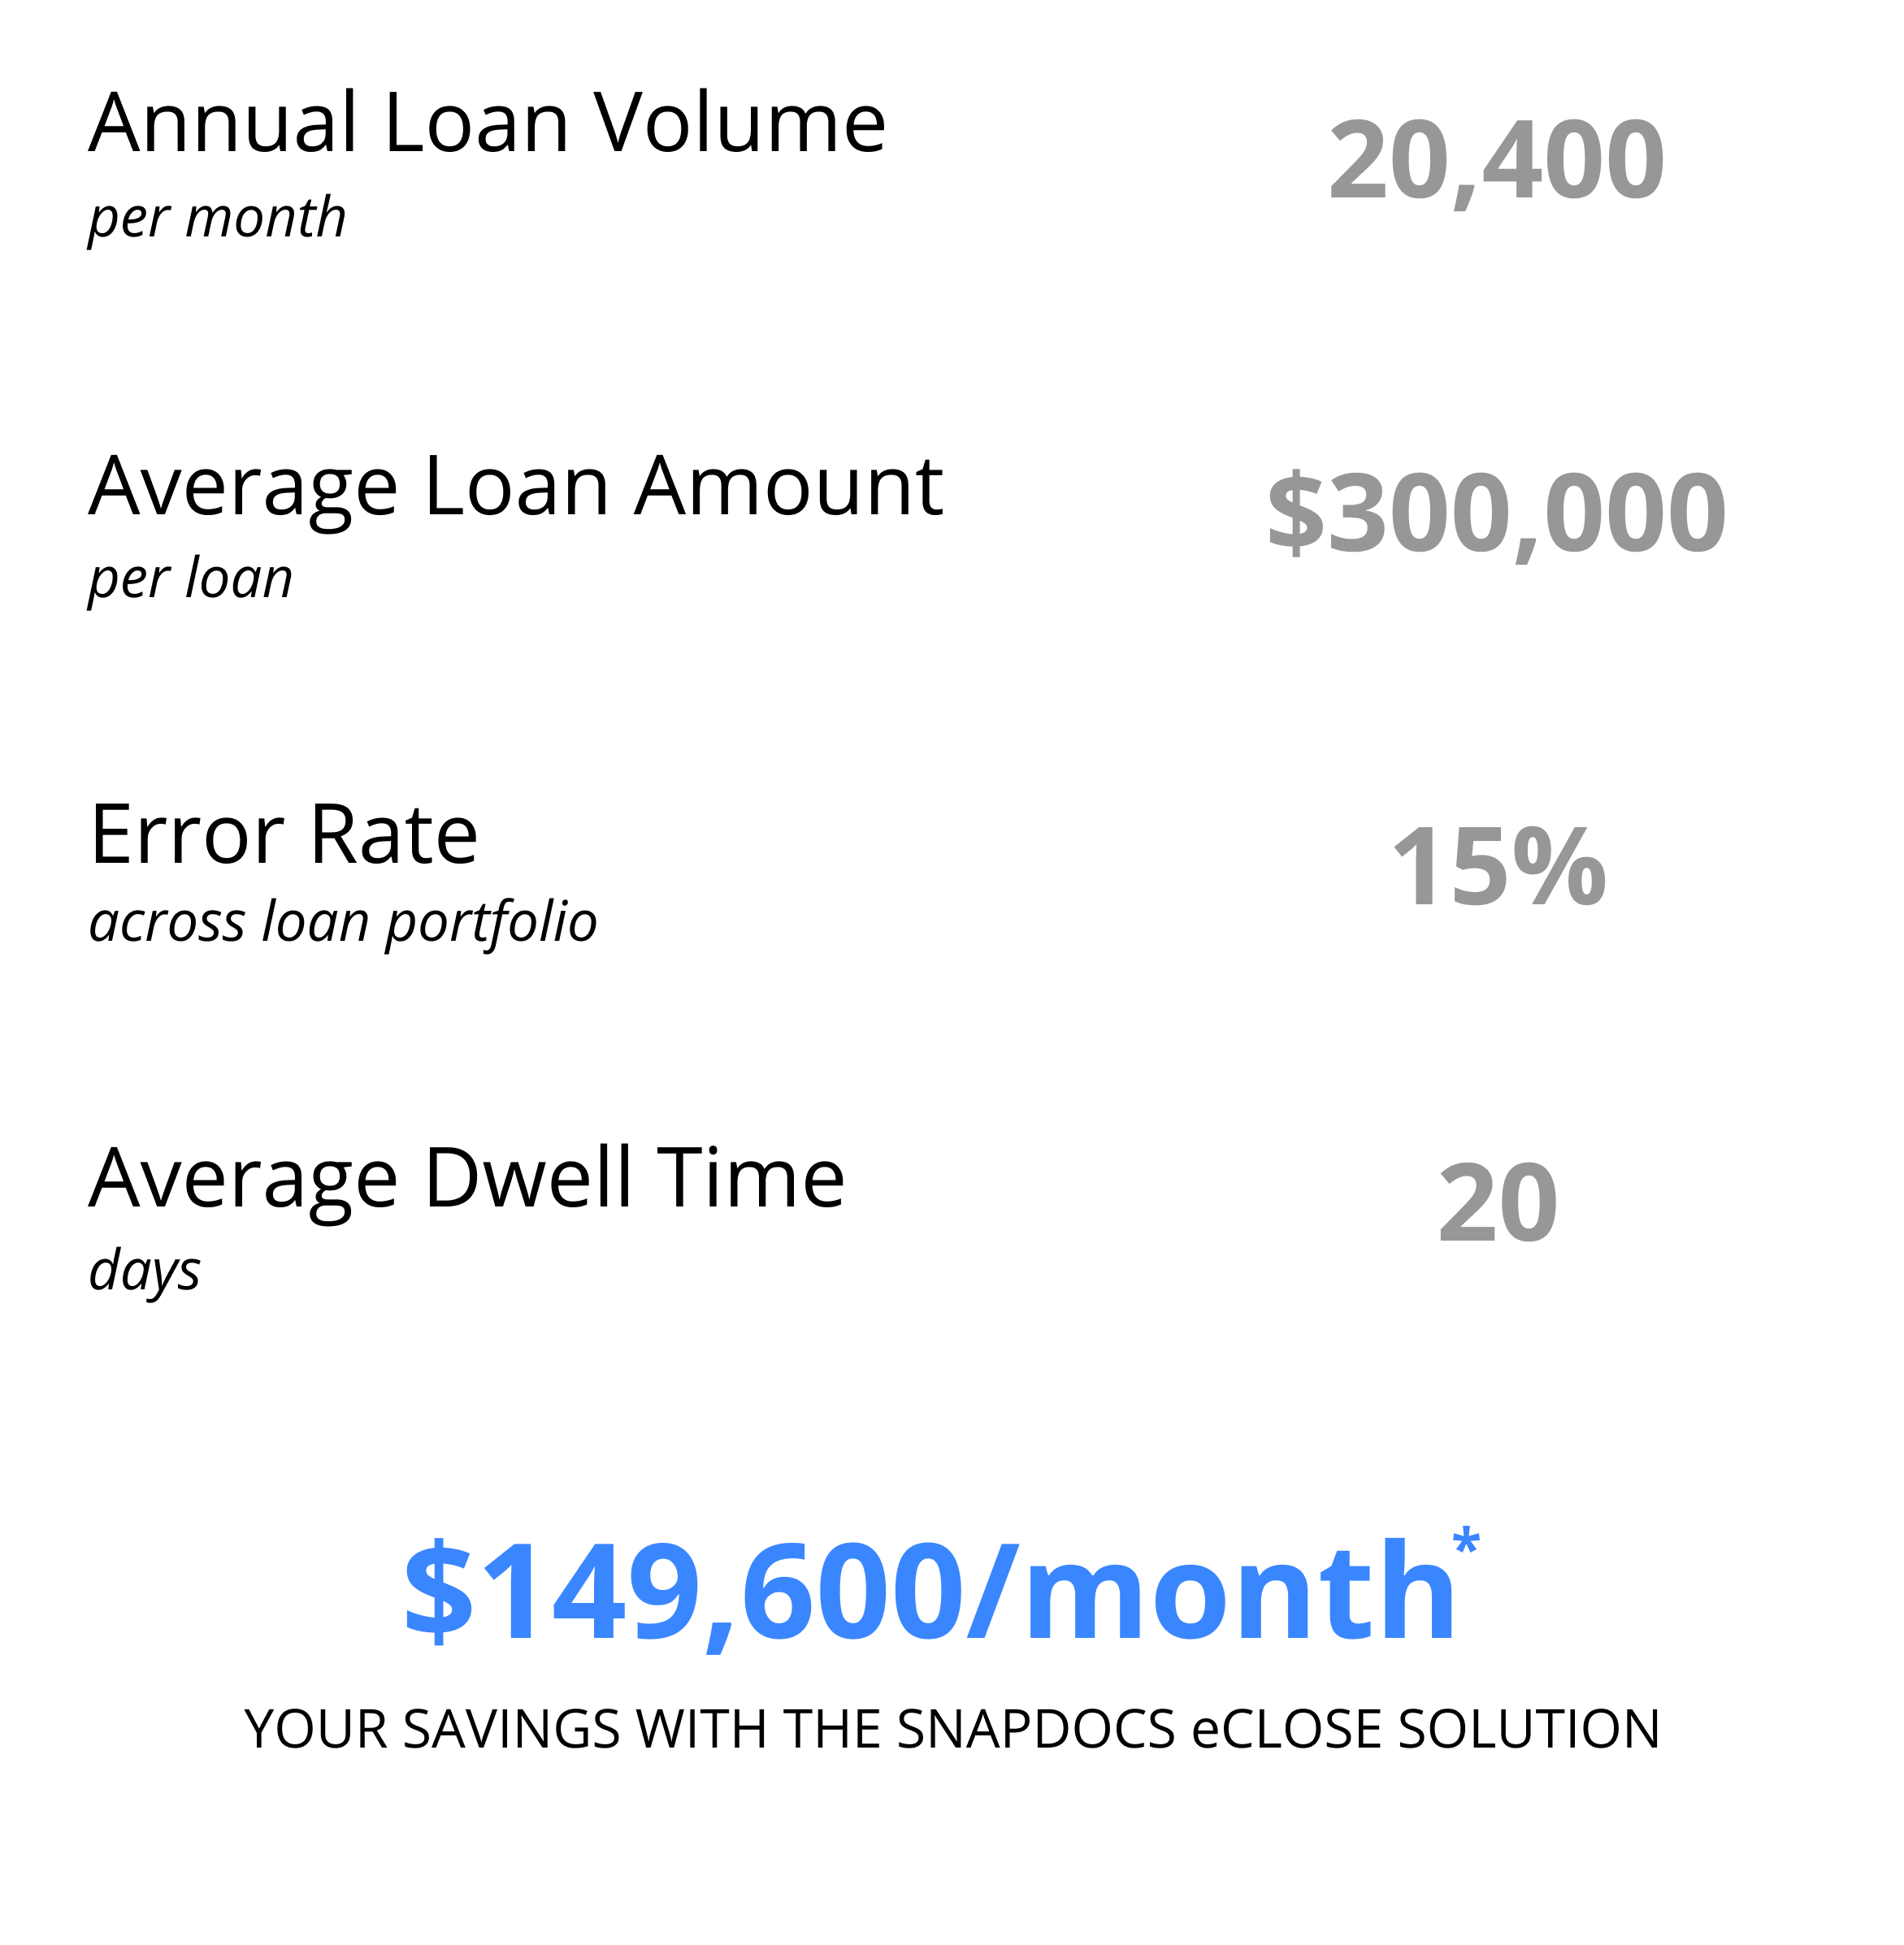 Monthly savings with Snapdocs eClose solution